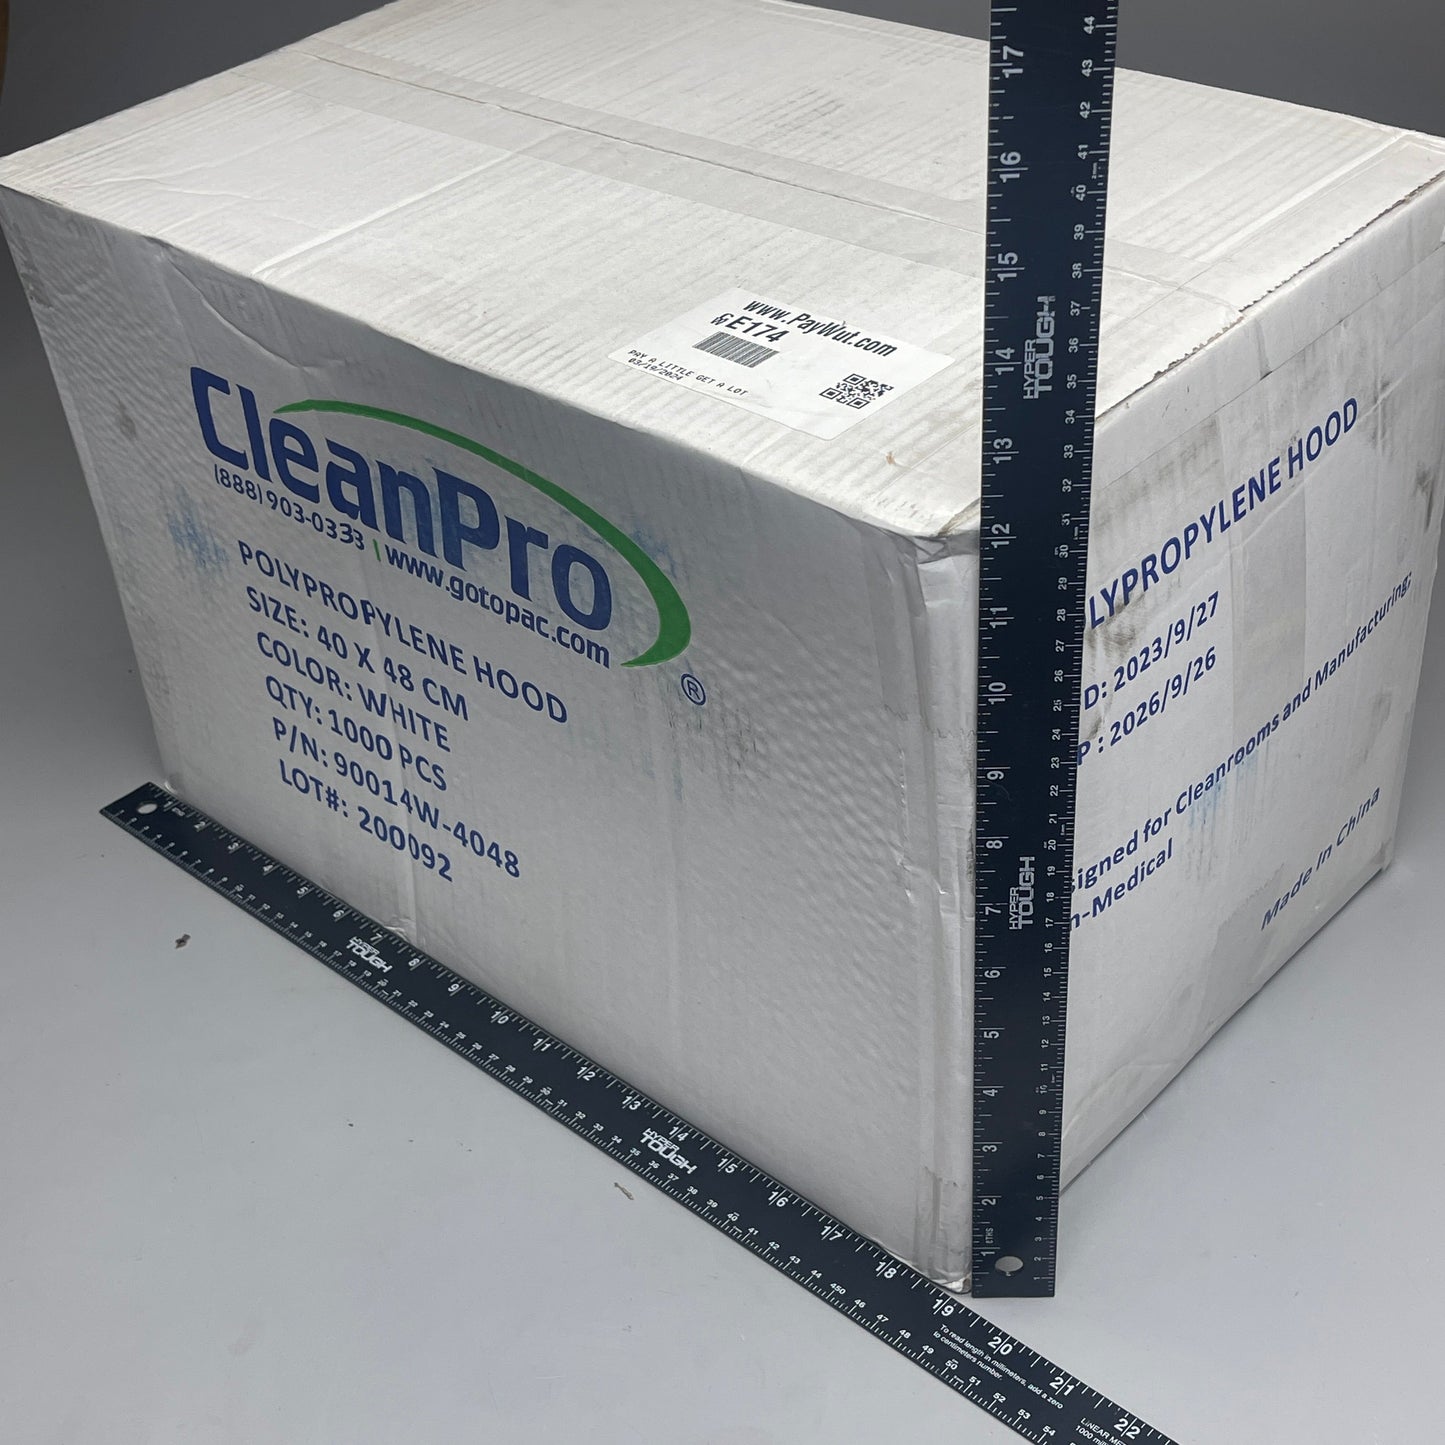 CLEANPRO (1,000 PACK) Bouffant Hood Disposable 90014W-4048 White BB 09/26/26